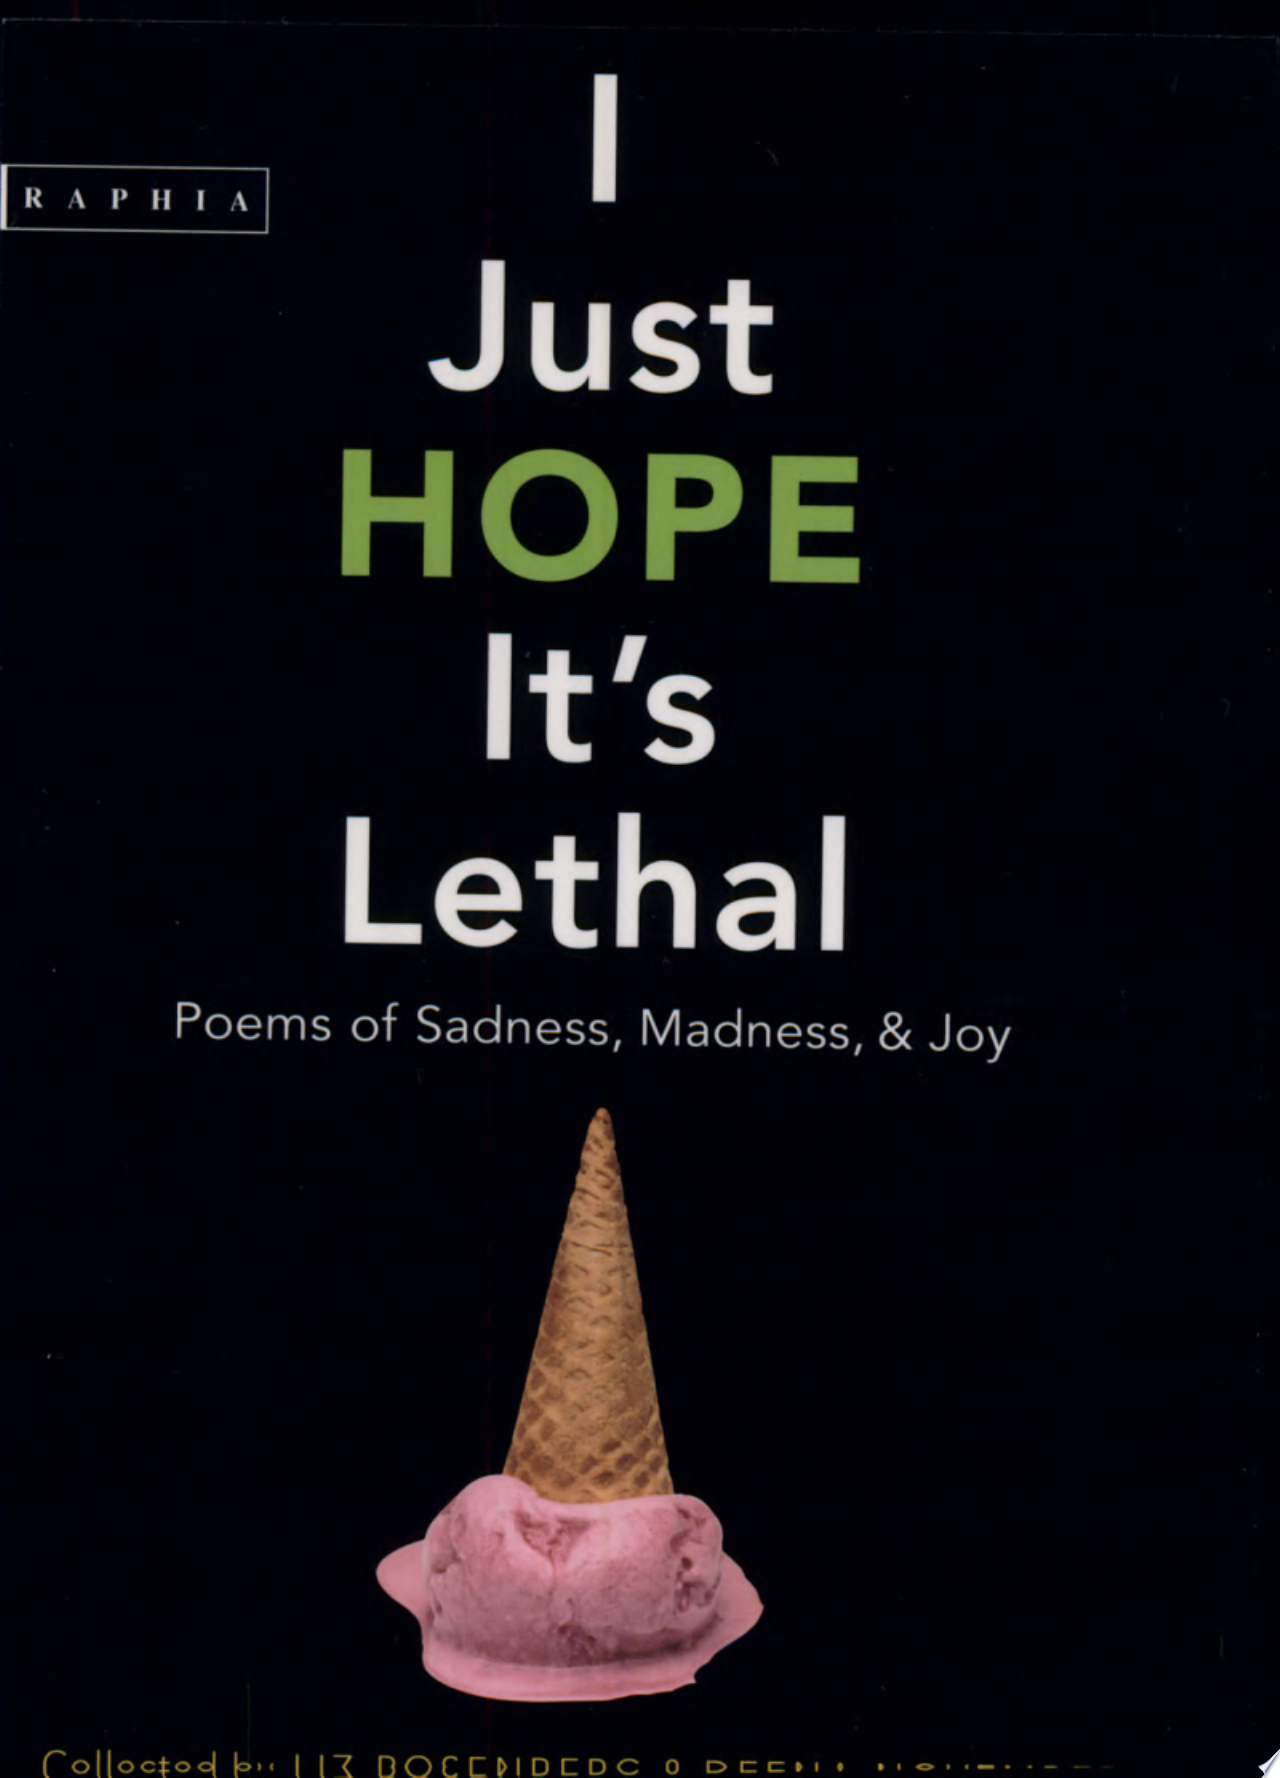 Image for "I Just Hope It's Lethal"